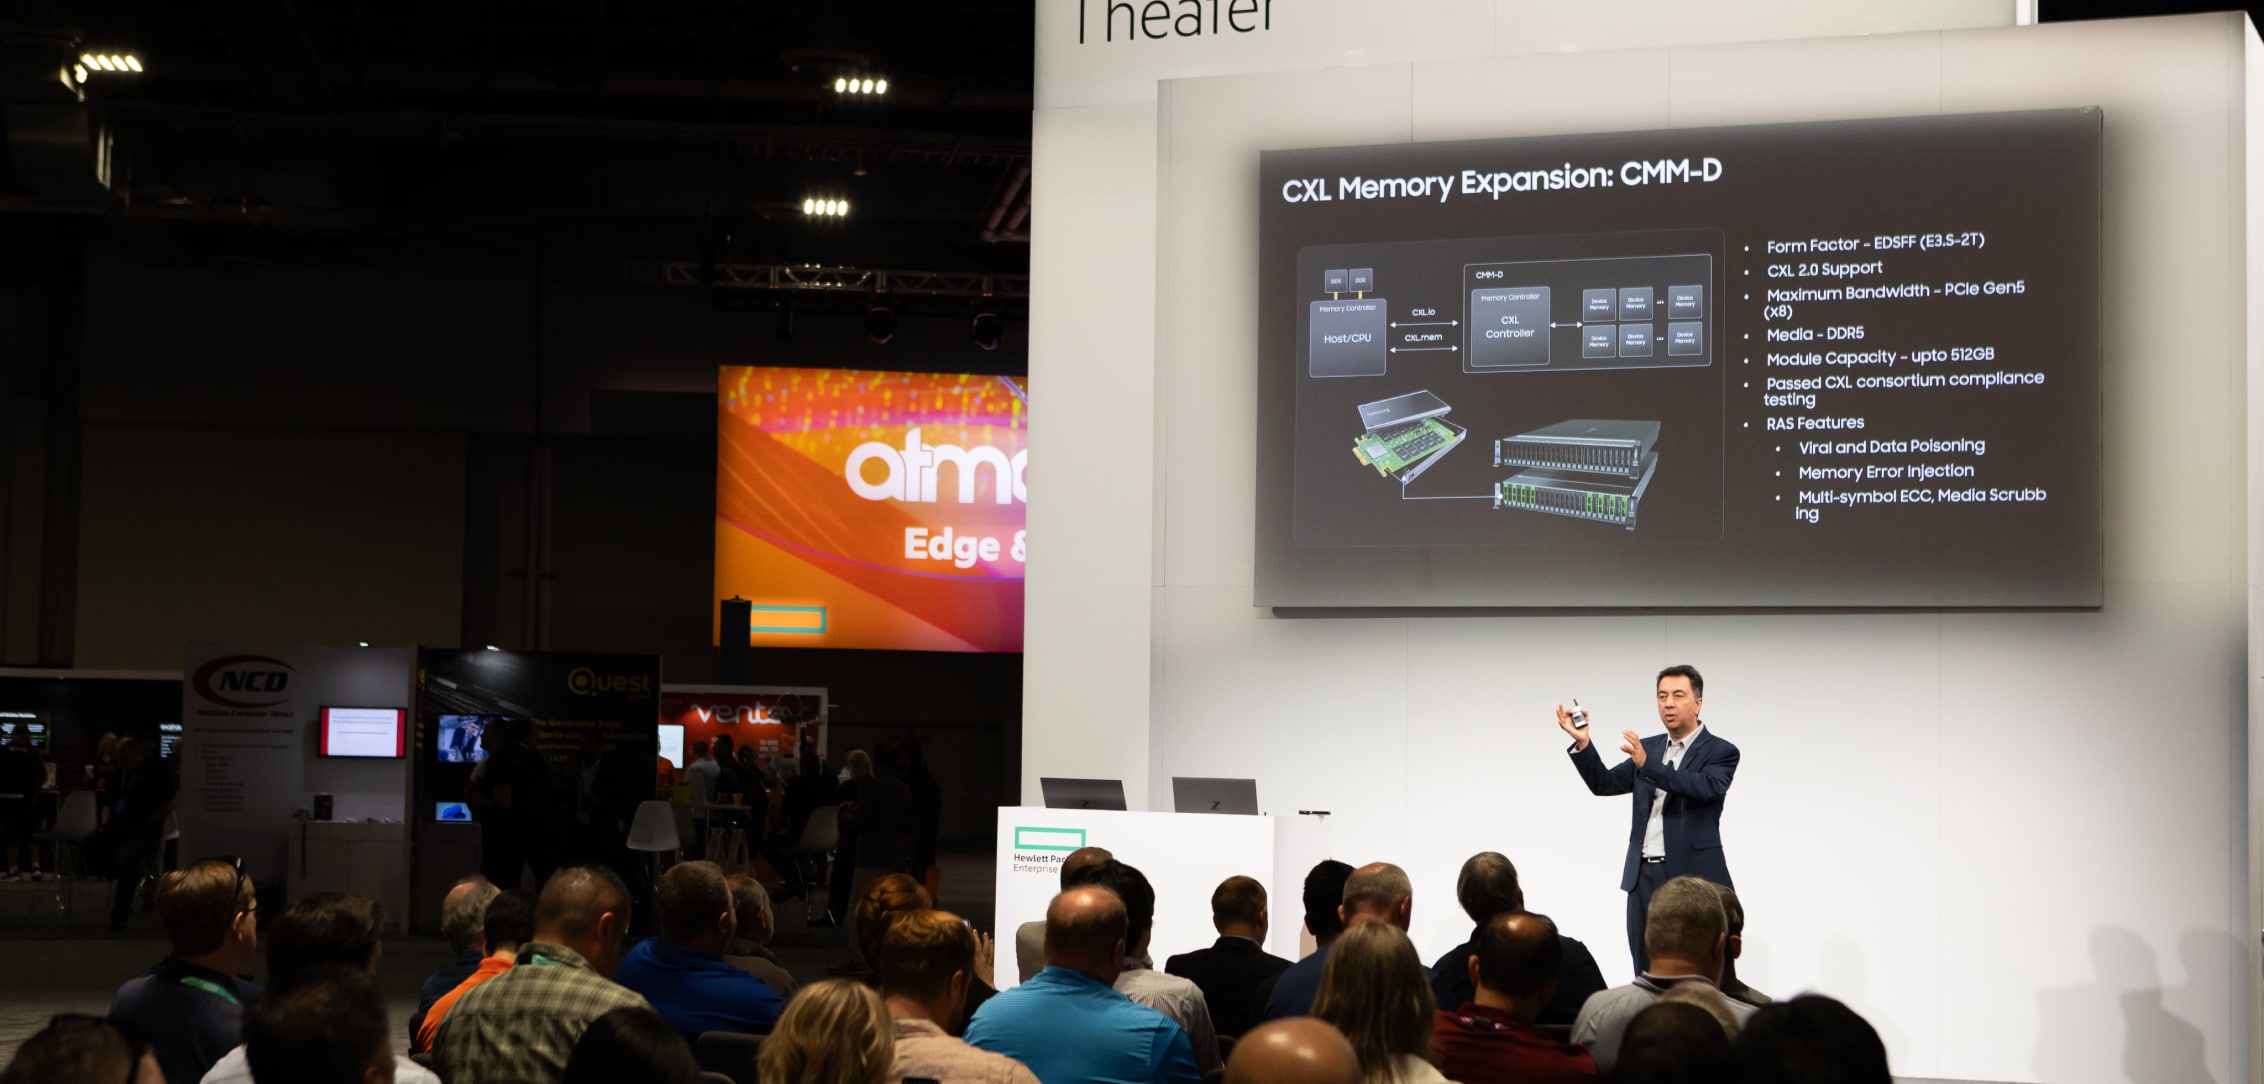 A speaker presenting on CXL Memory Expansion at the Edge & Networking Theater, detailing the features and benefits of CMM-D technology to attendees.